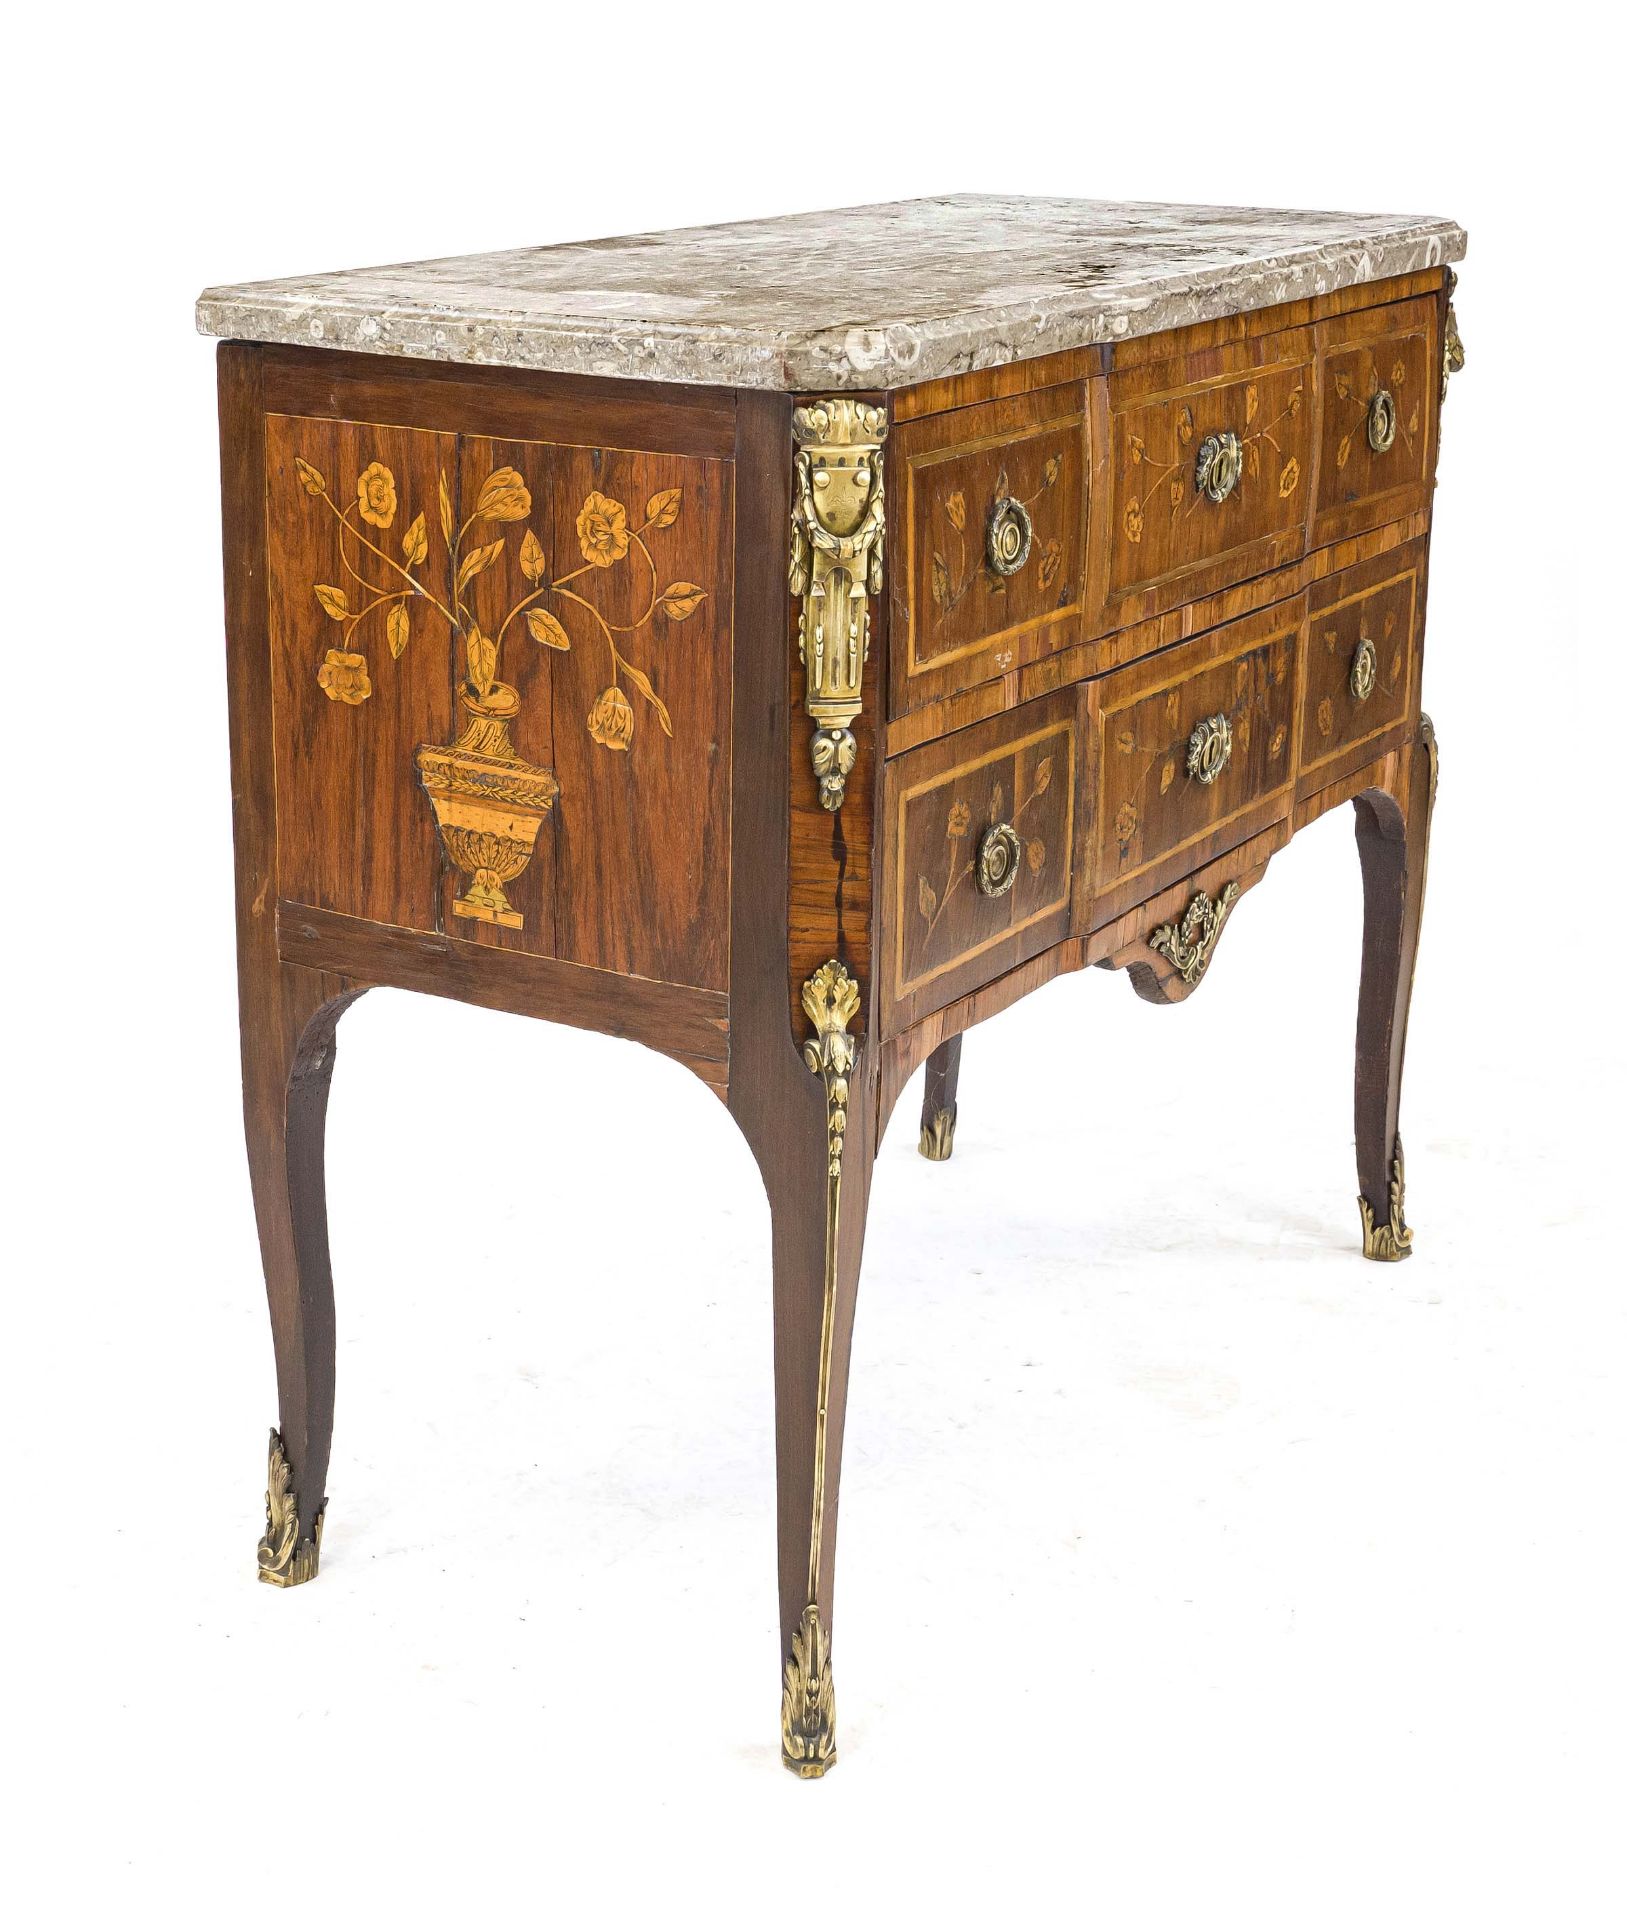 Transition chest of drawers, France, 18th century, signed Jean-Charles Ellaume (became master in - Image 2 of 4